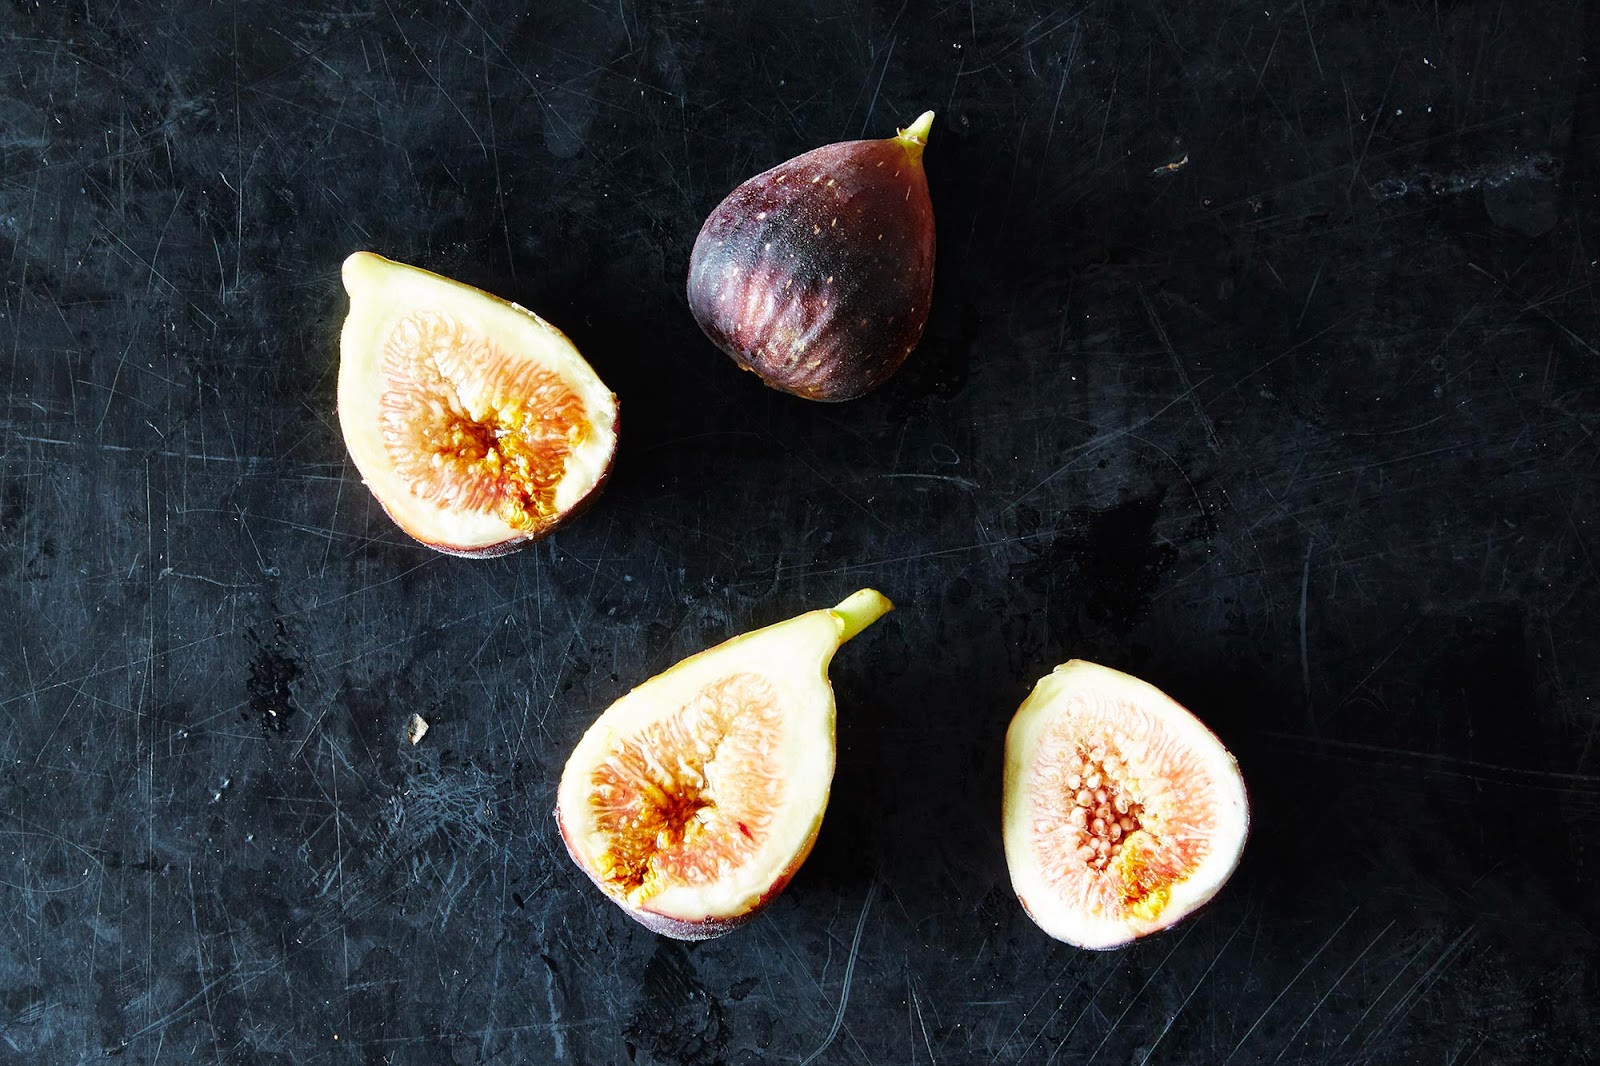 https://food52.com/blog/10789-fresh-figs-and-9-of-our-favorite-ways-to-use-them